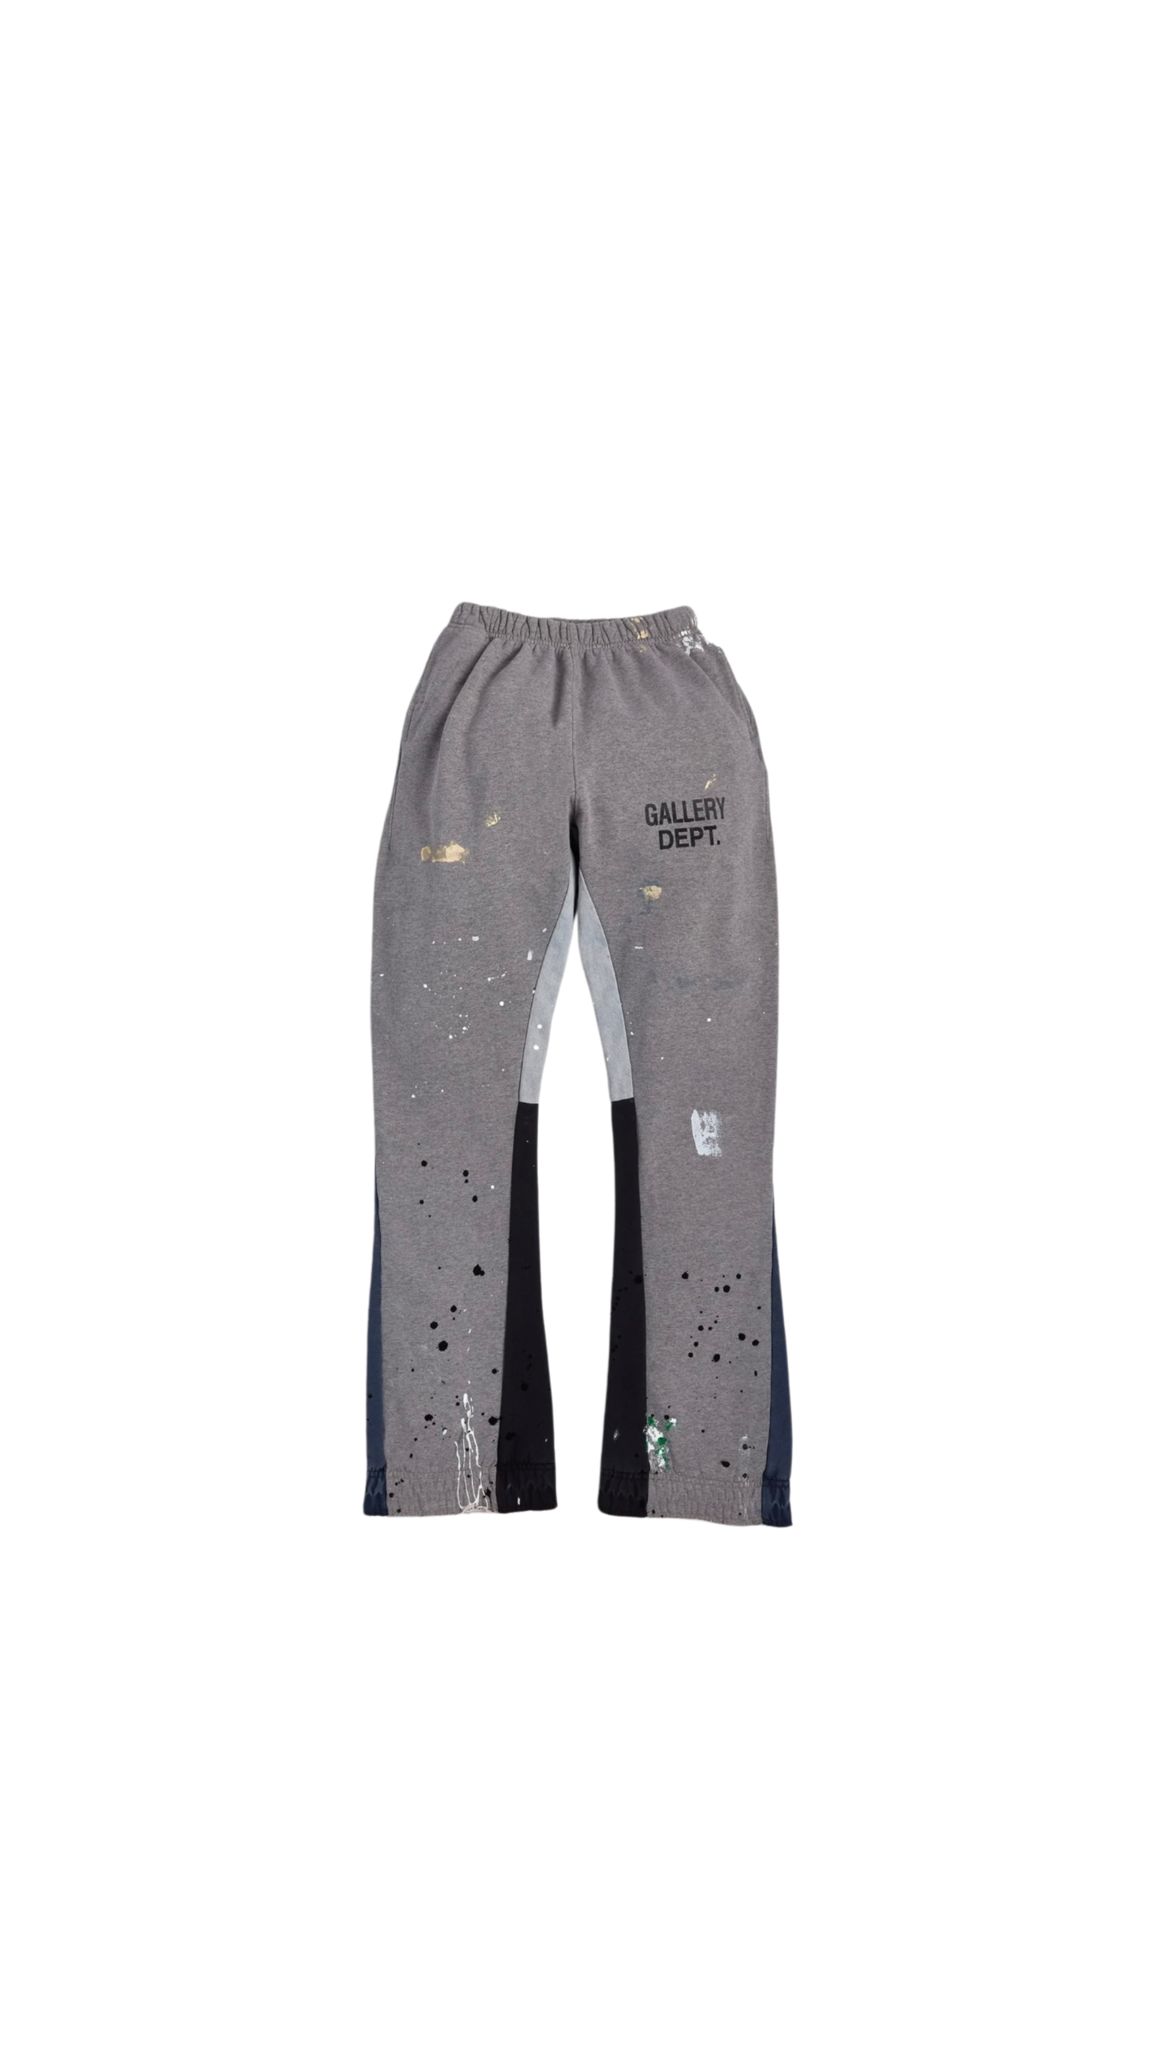 Gallery Dept. Painted Flare Sweat Pants - Grey - AVA GALERIE